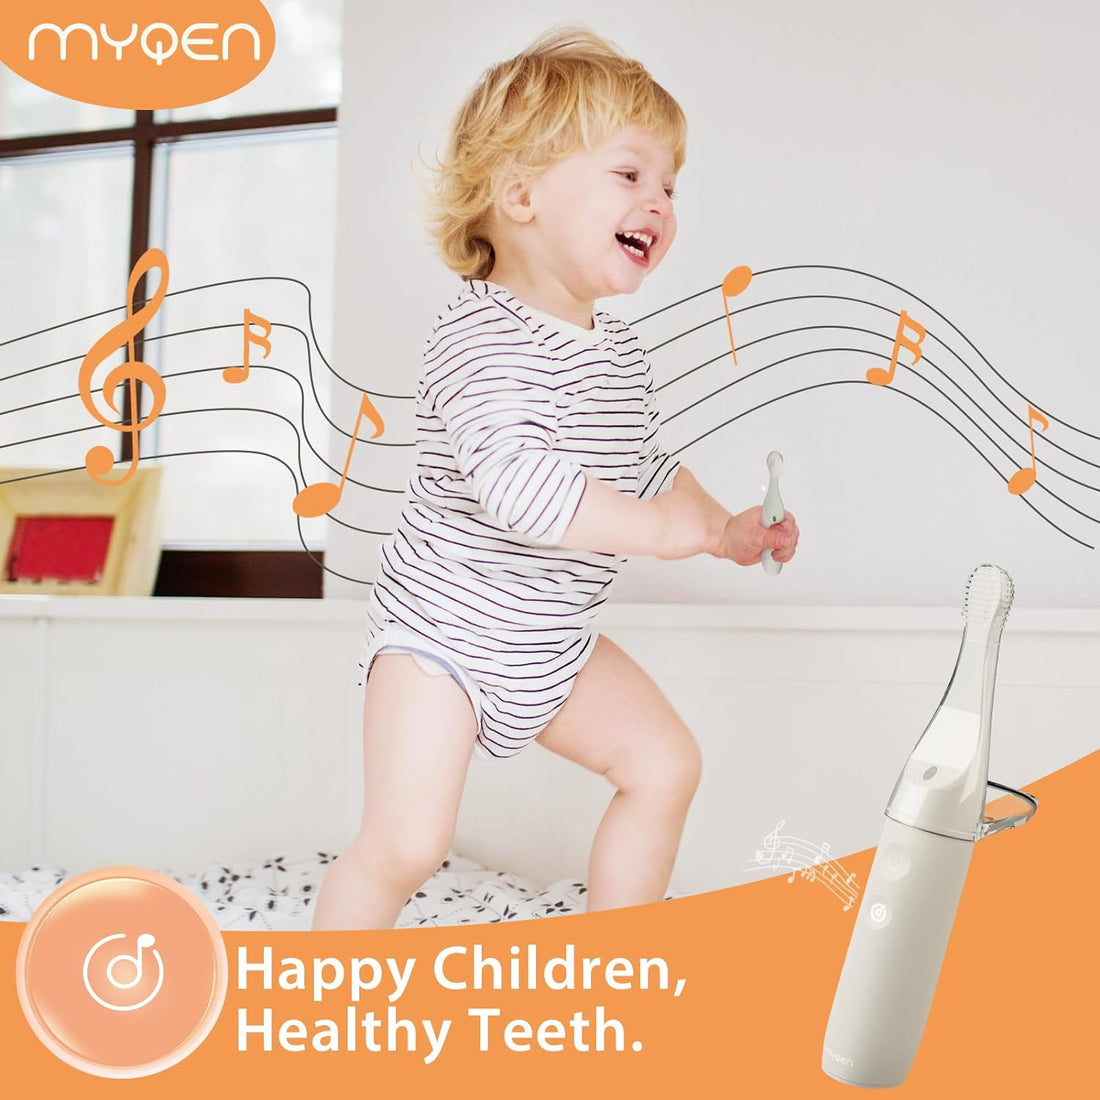 MYQEN Kids Electric Toothbrush, Complete Tooth Care Solution for Kids & Toddlers 1-6+, Soft Toothbrushes with Music, Light, 2-Minute Timer, Drop-Proof and Easy-Grip